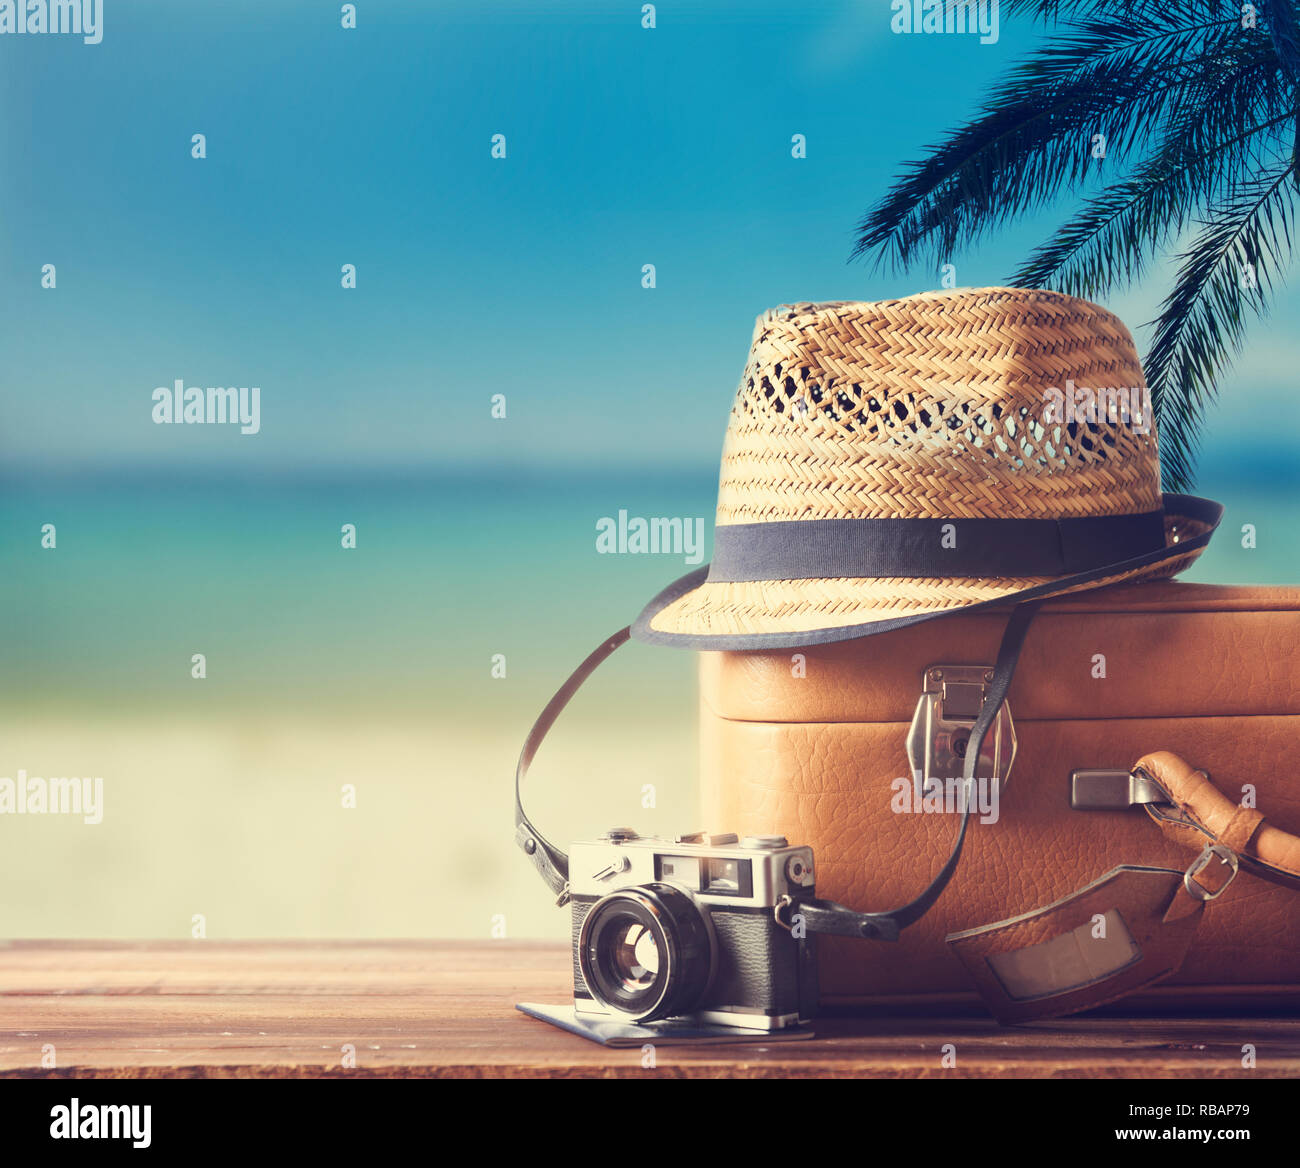 Vintage suitcase, hipster hat, photo camera and passport on wooden dack. Tropical sea, beach and palm three in background. Summer holiday traveling de Stock Photo